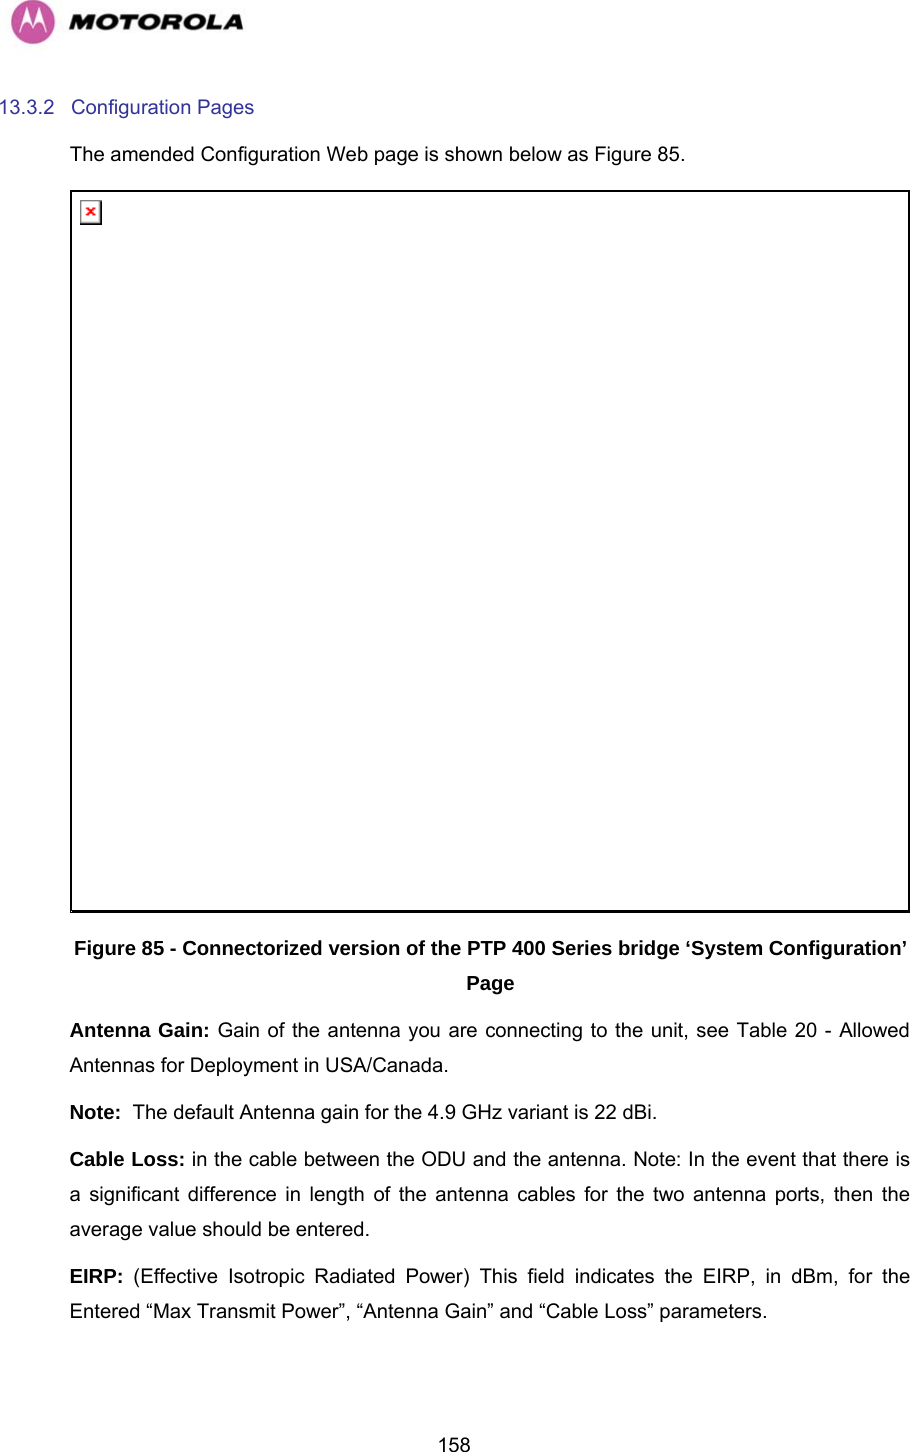   15813.3.2 Configuration Pages The amended Configuration Web page is shown below as Figure 85.  Figure 85 - Connectorized version of the PTP 400 Series bridge ‘System Configuration’ Page Antenna Gain: Gain of the antenna you are connecting to the unit, see Table 20 - Allowed Antennas for Deployment in USA/Canada. Note:  The default Antenna gain for the 4.9 GHz variant is 22 dBi. Cable Loss: in the cable between the ODU and the antenna. Note: In the event that there is a significant difference in length of the antenna cables for the two antenna ports, then the average value should be entered. EIRP:  (Effective Isotropic Radiated Power) This field indicates the EIRP, in dBm, for the Entered “Max Transmit Power”, “Antenna Gain” and “Cable Loss” parameters.  